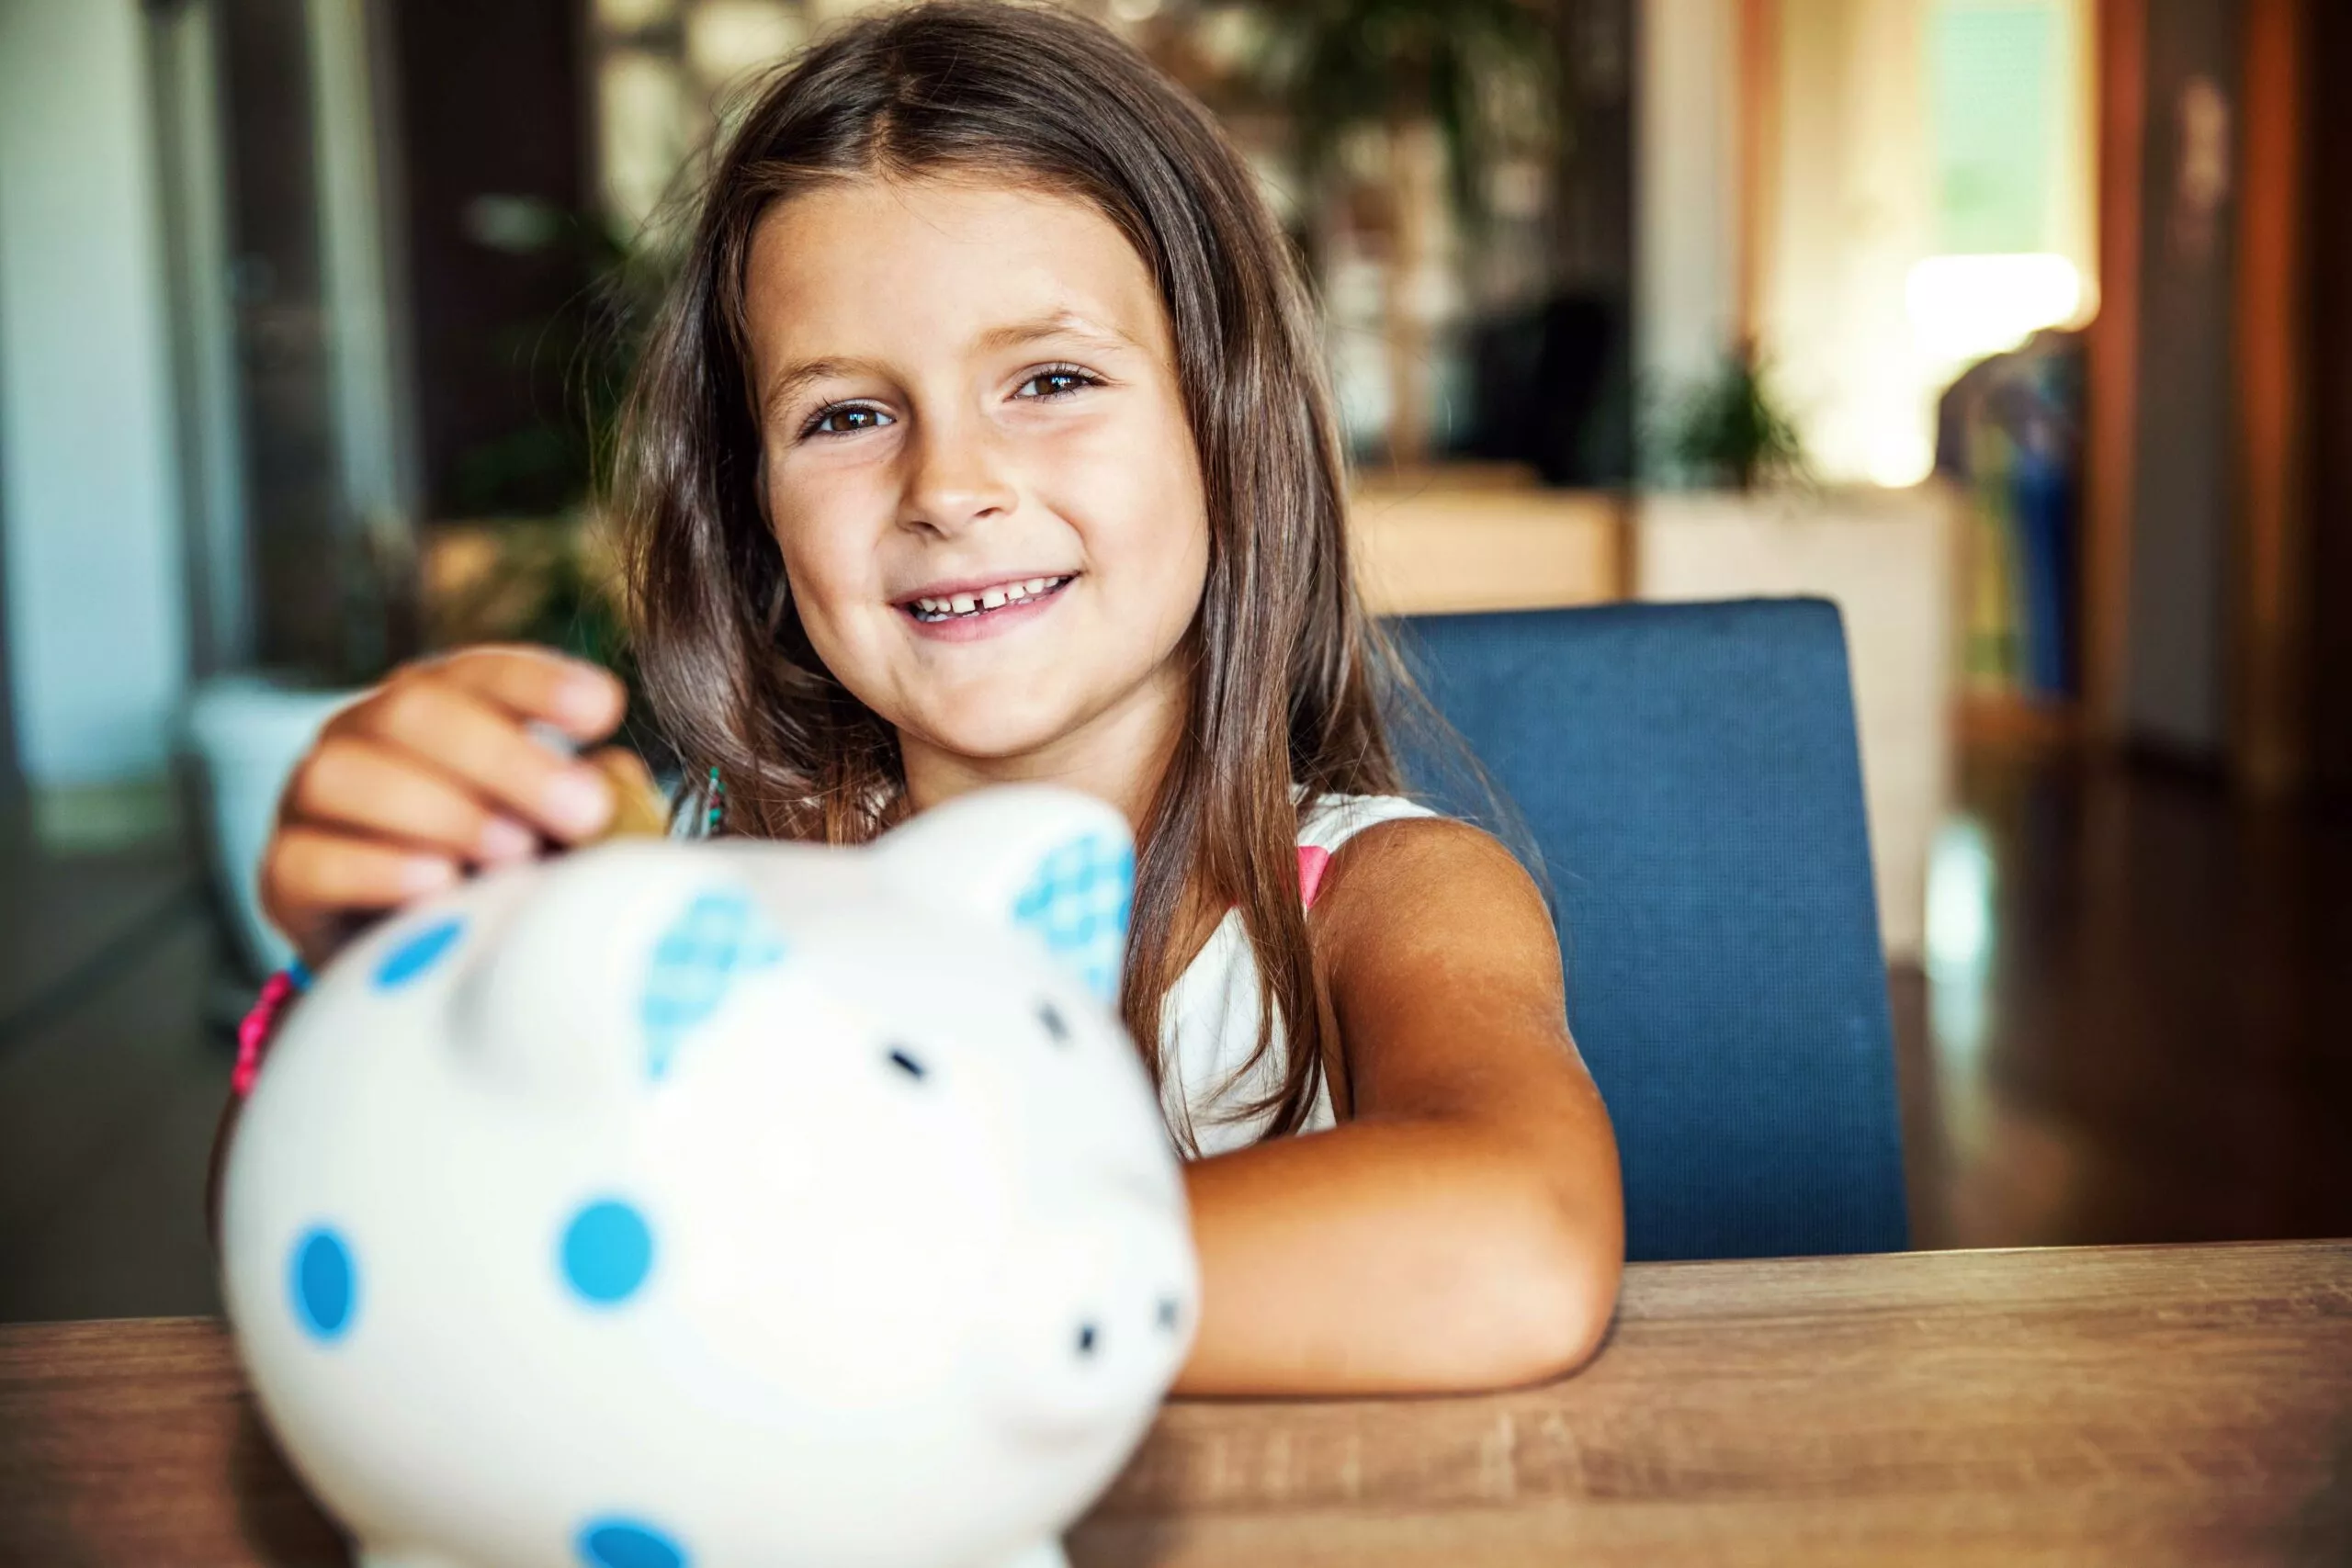 child smiling with ceramic piggy bank on table